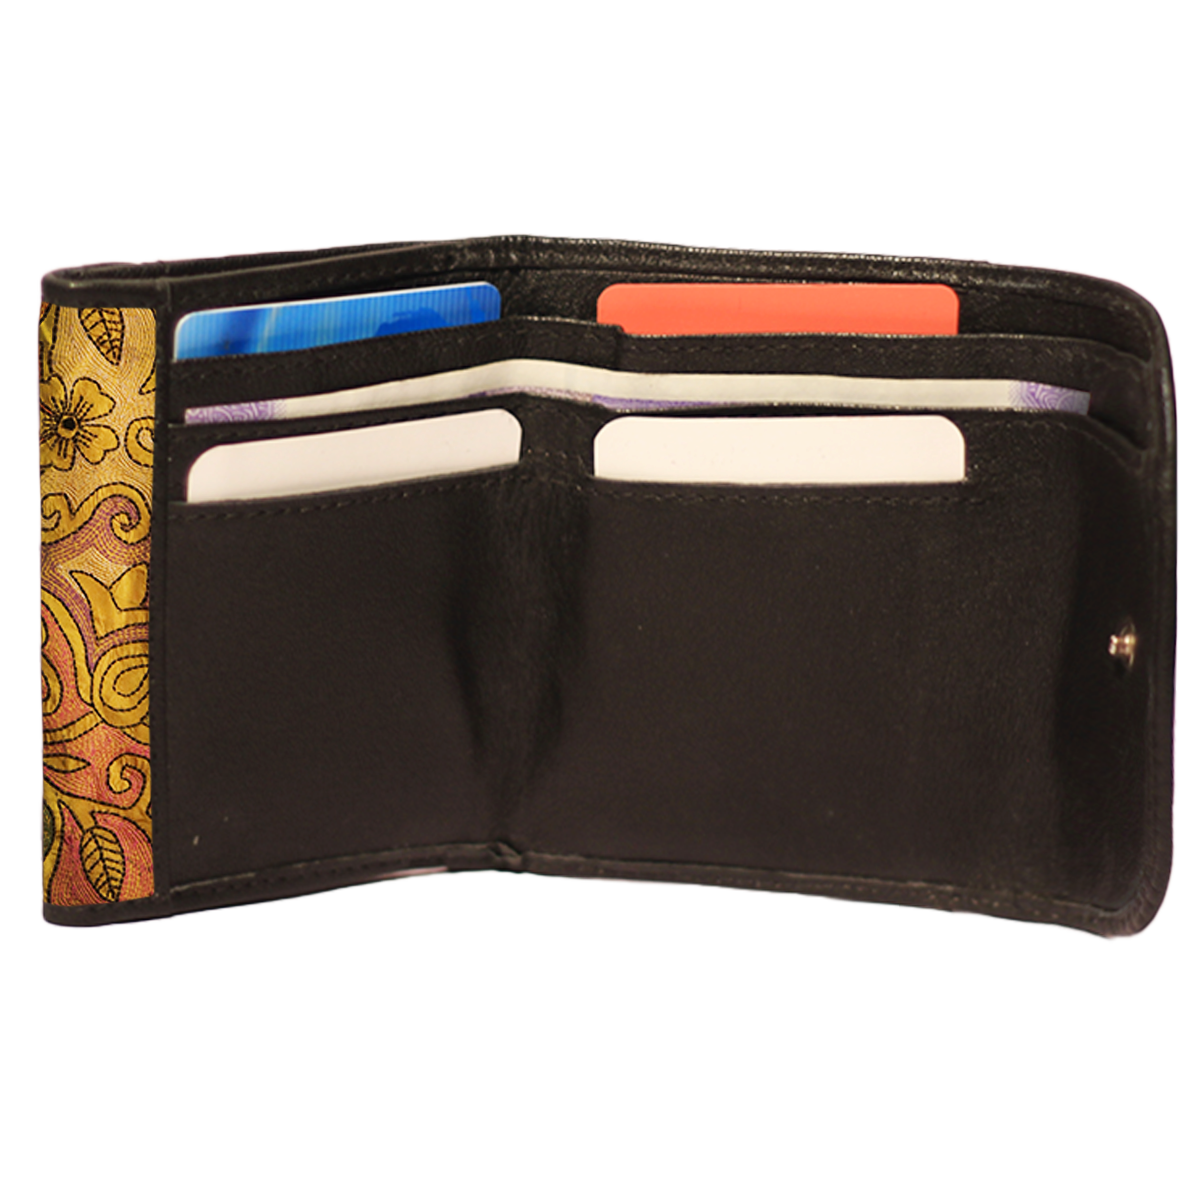 Leather and Embroidery Dual Flap Women's Wallet - Ridhima